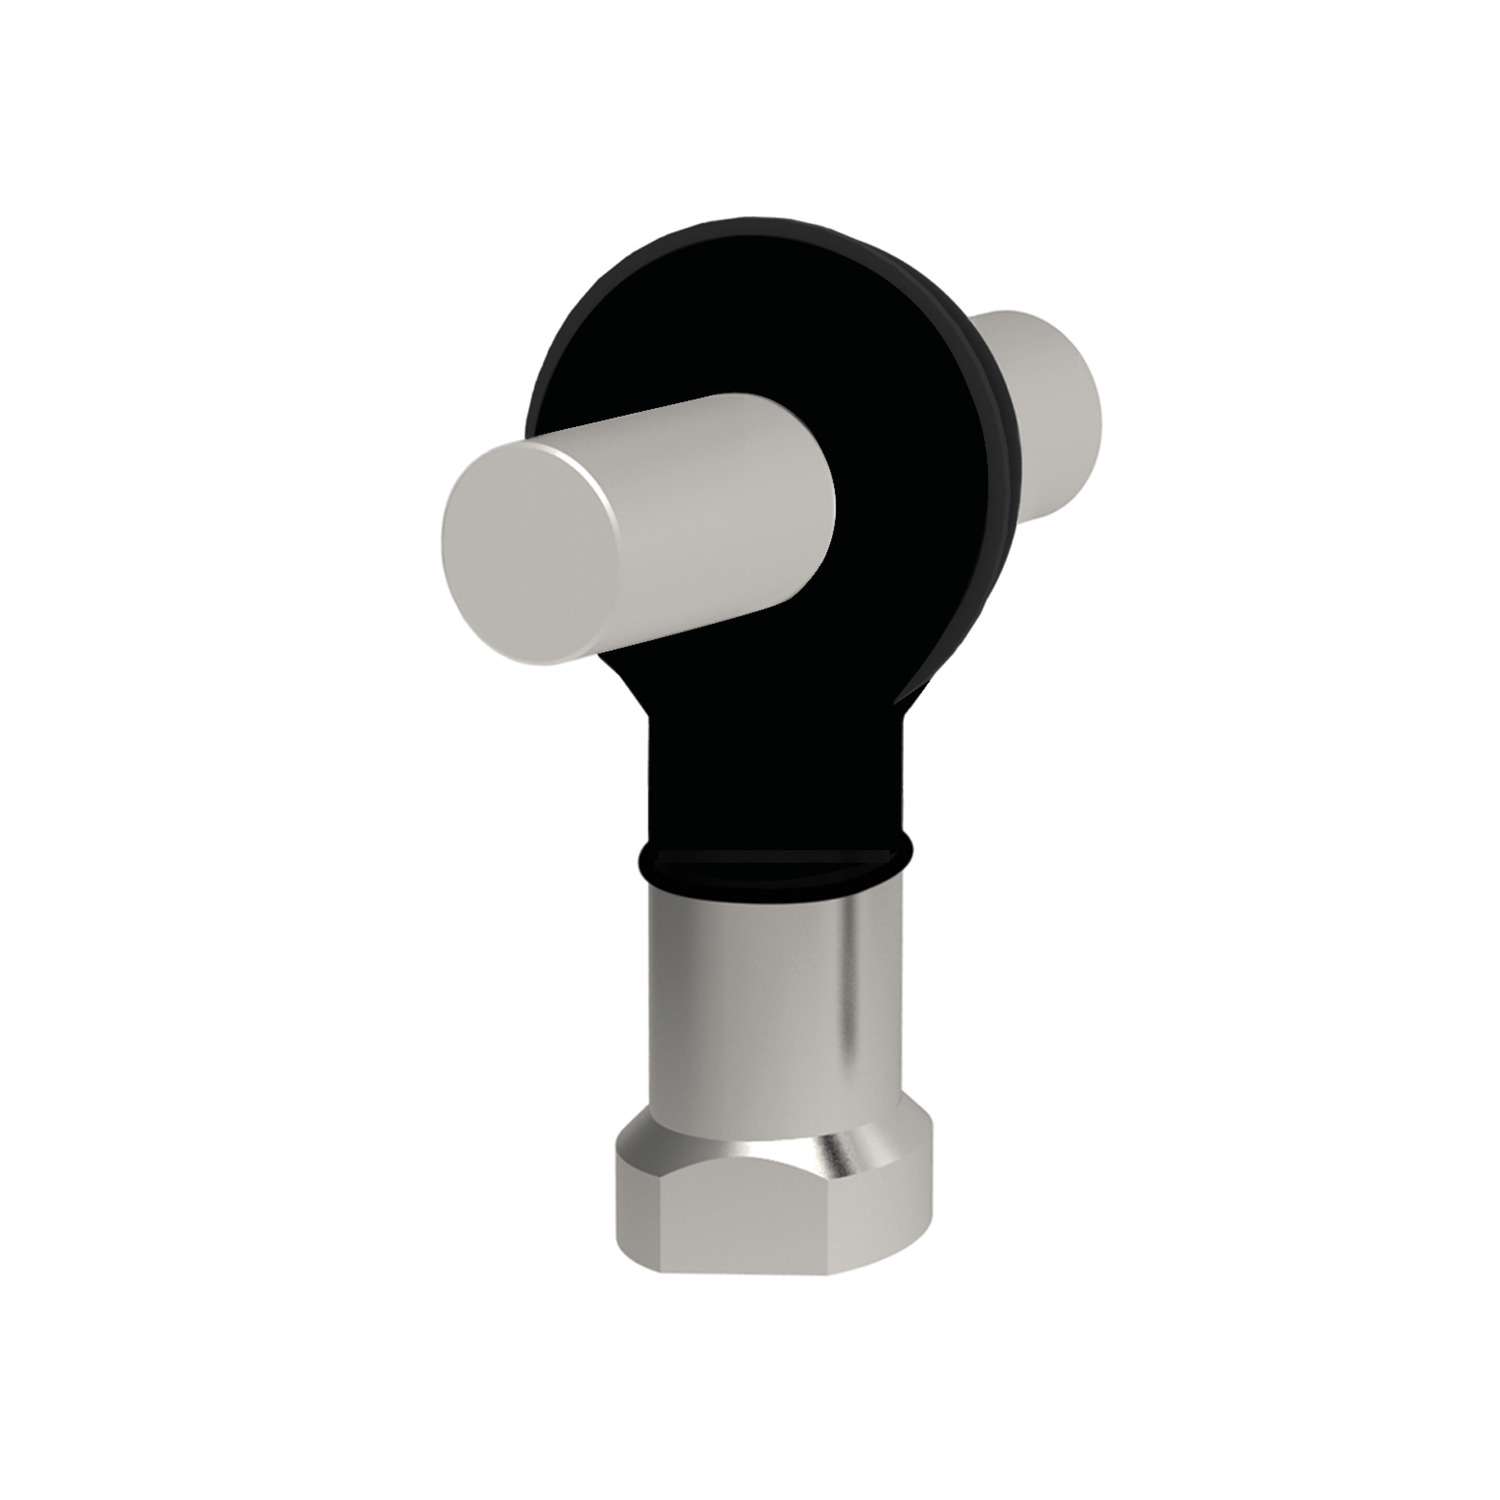 Rubber Protector Cap For use with our maintenance free rod ends, these rubber caps add additional layer of protection. Suitable temperature range of -20°C to +110°C.